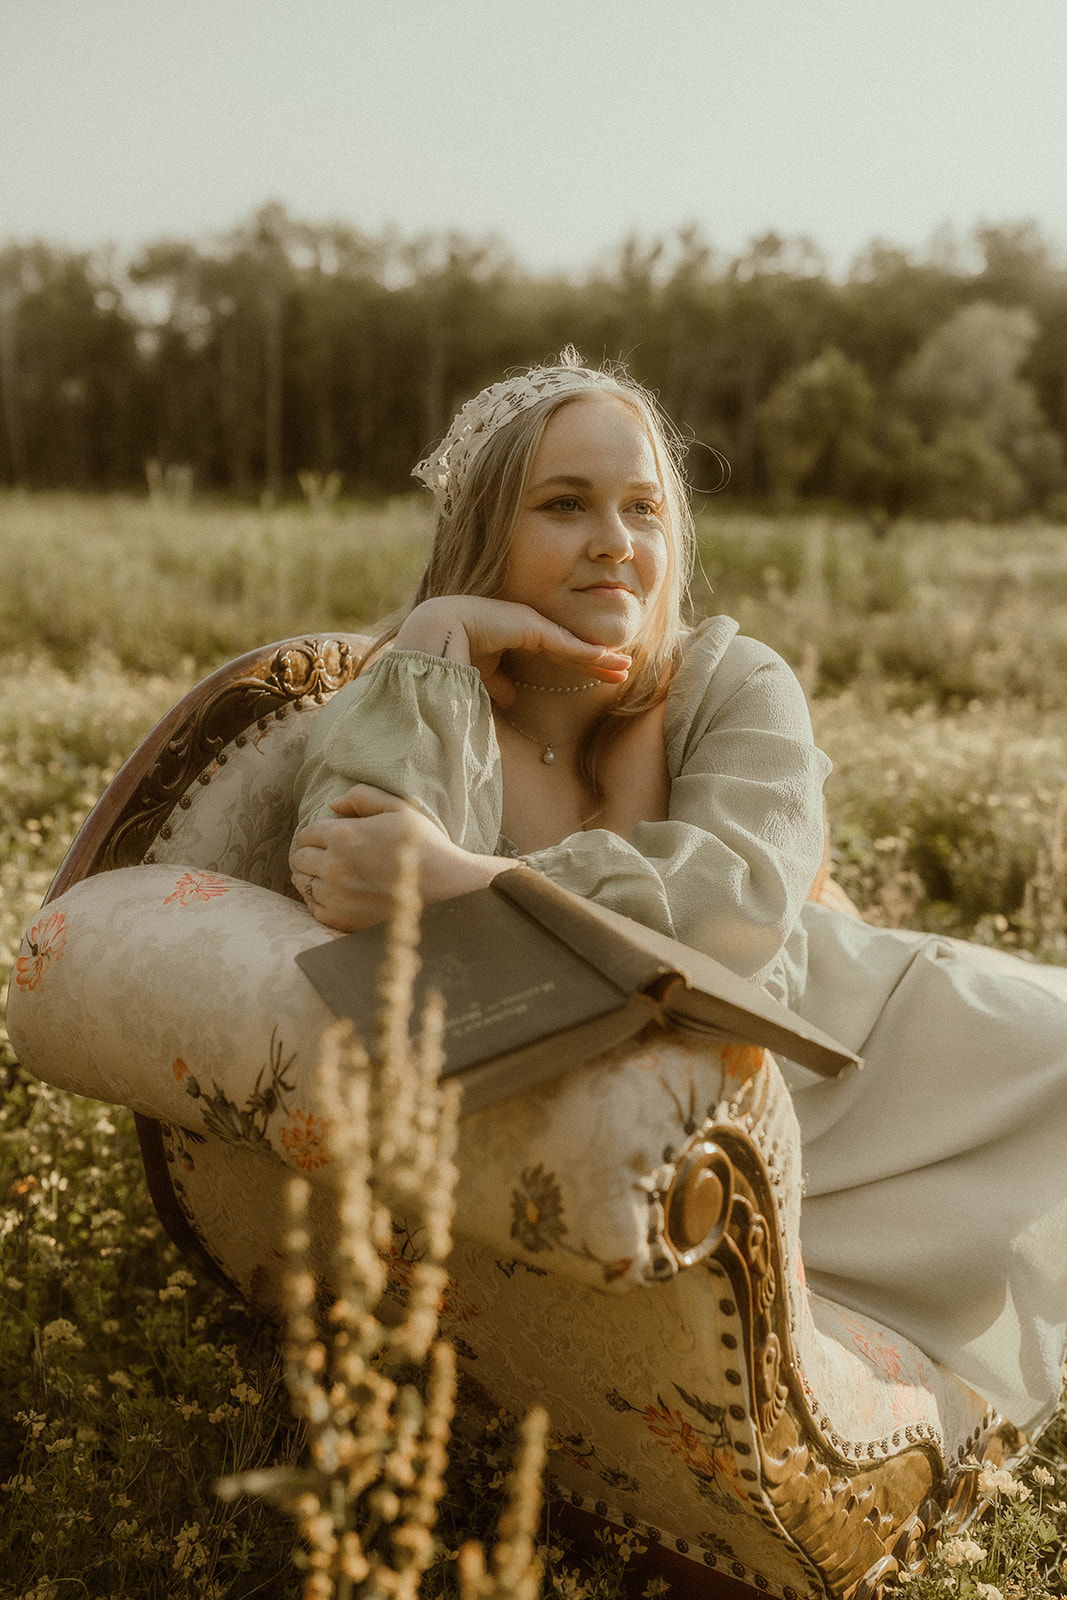 young girl poses with a vintage chaise and tiara for creative self portraits in a field